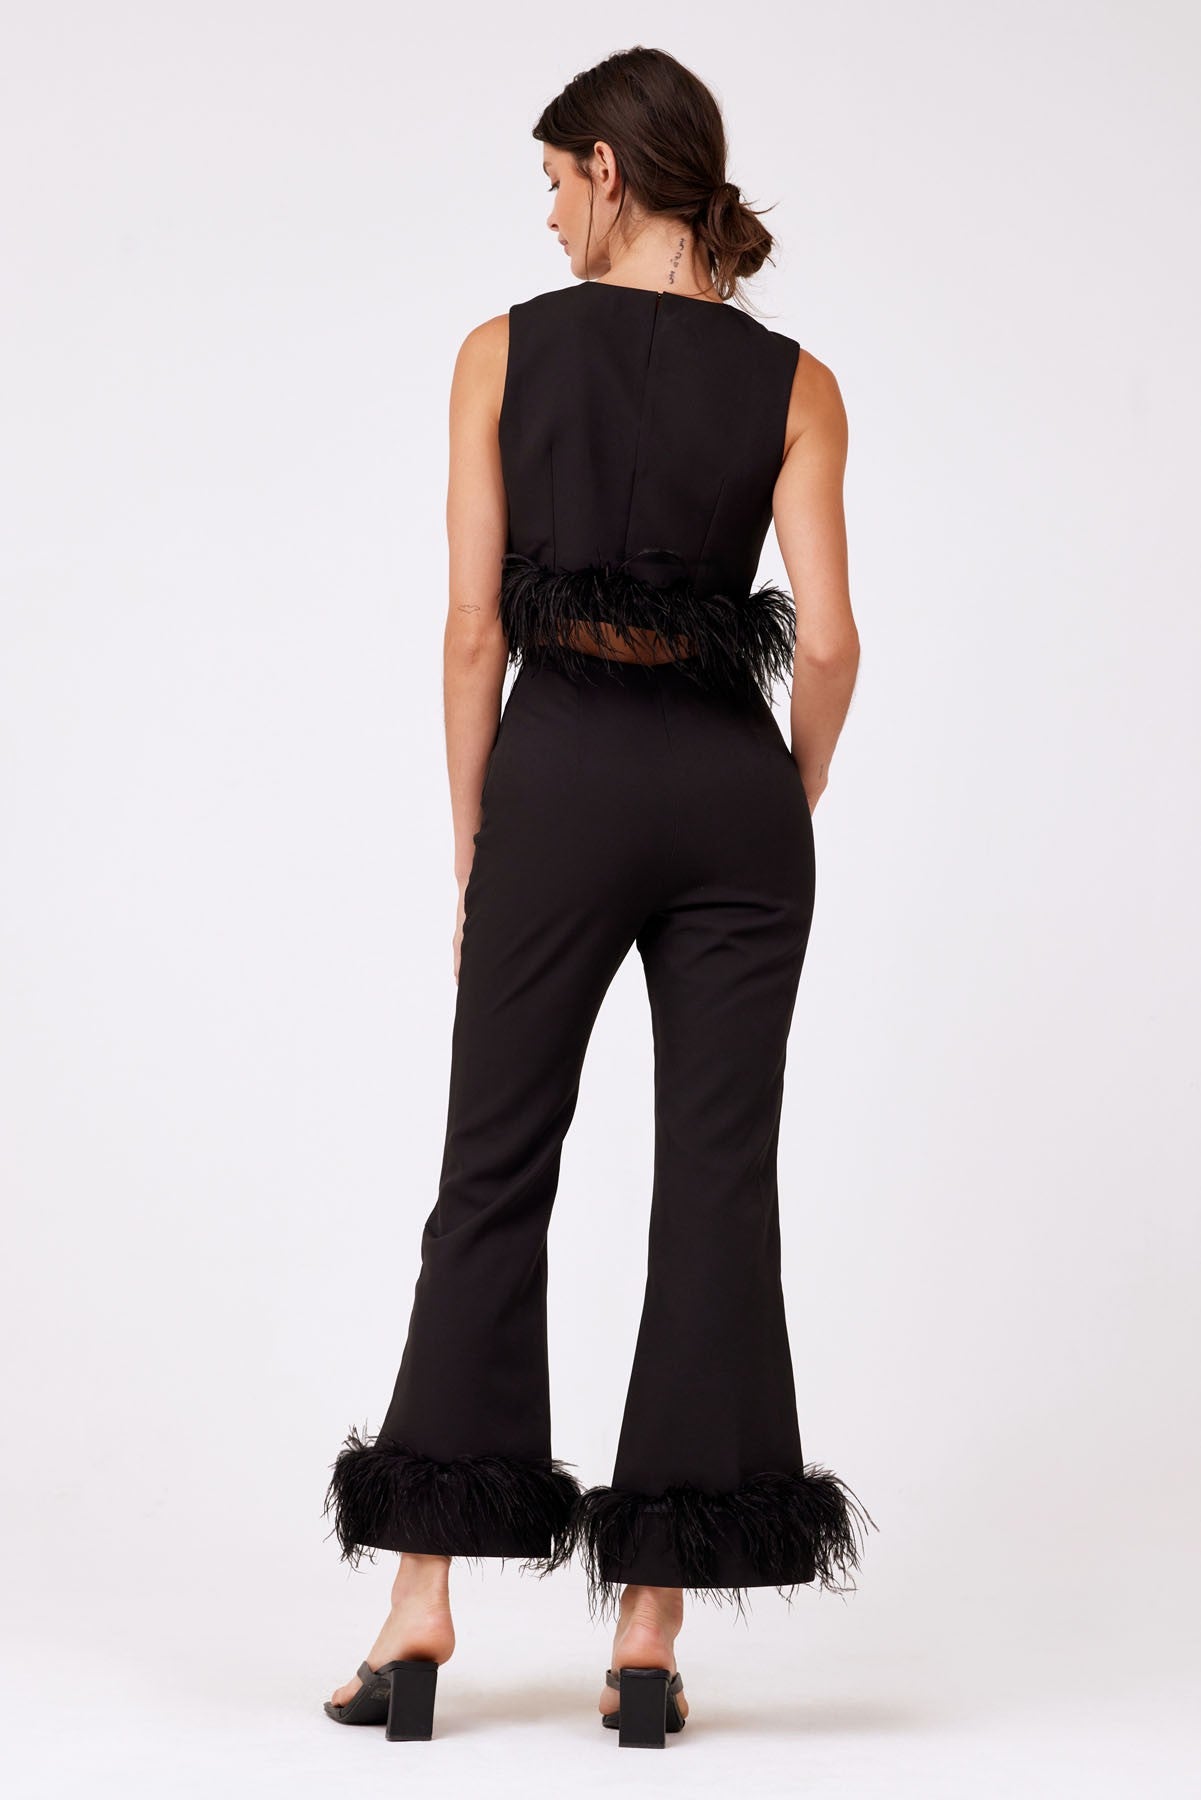 Light as a Feather Trim Pant